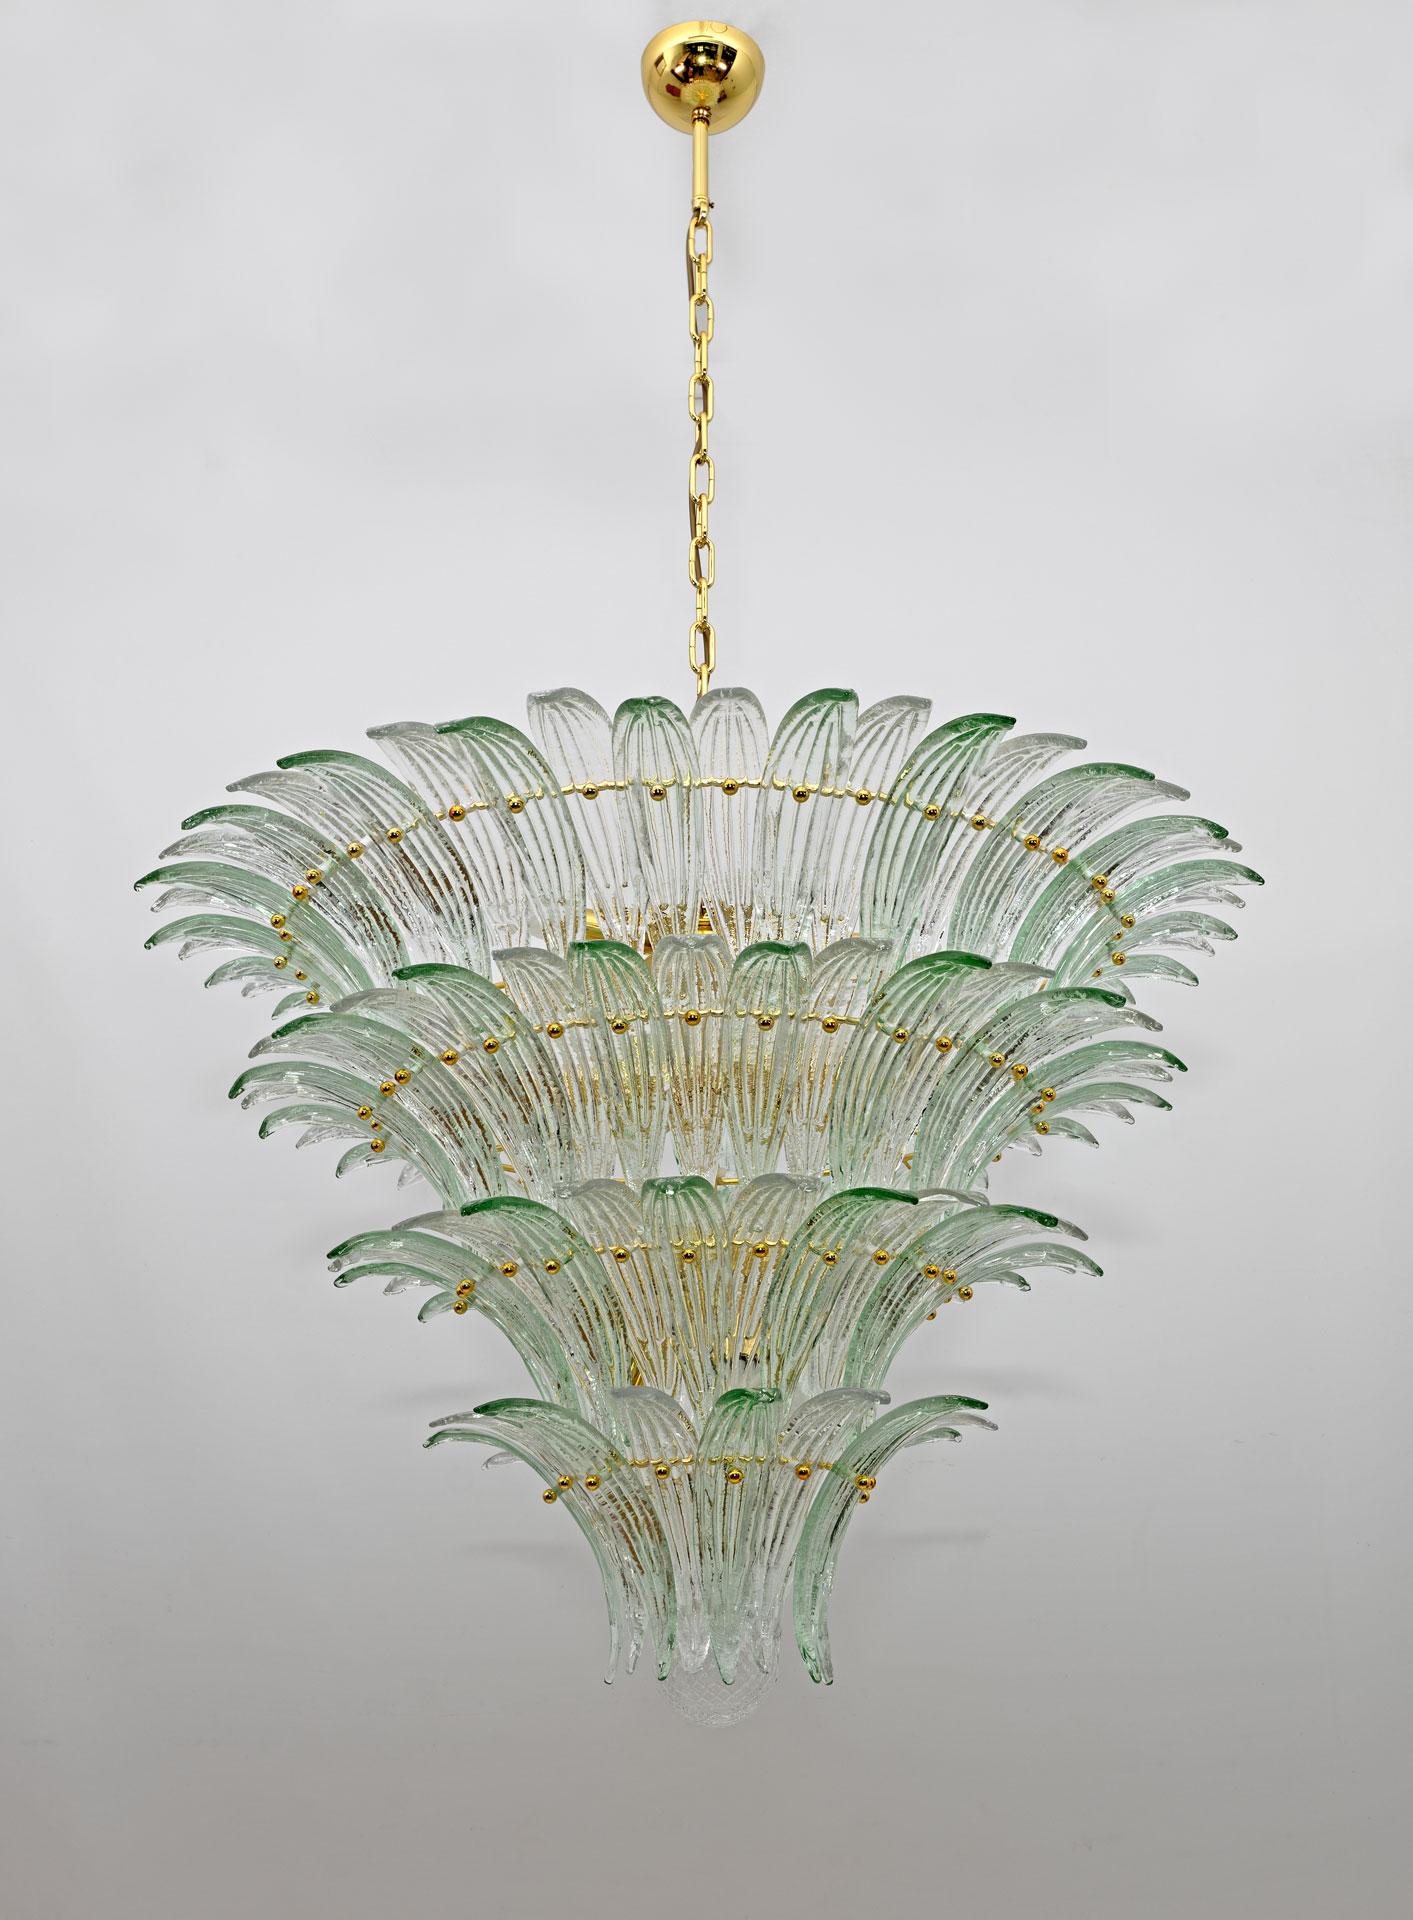 Large mid-century modern palmette chandelier in Murano glass, Barovier and Toso style, 1990s Italy. The chandelier is composed of a gold and brass painted metal structure, green and transparent Murano glass palmettes. The large Italian chandelier